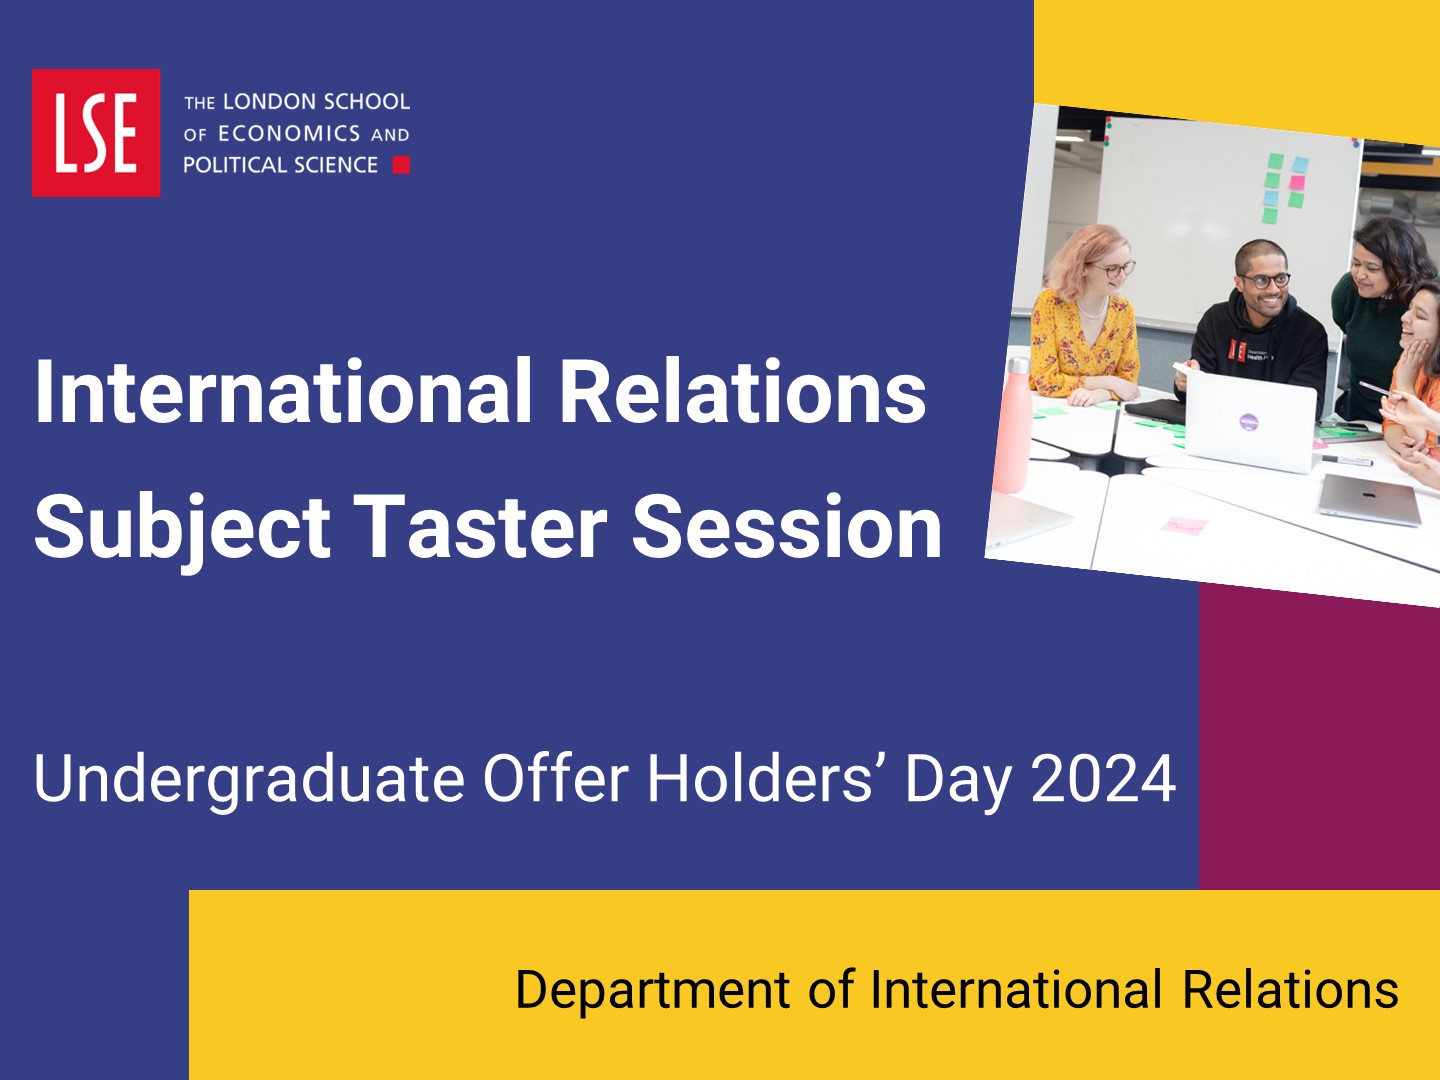 Watch the international relations subject taster session